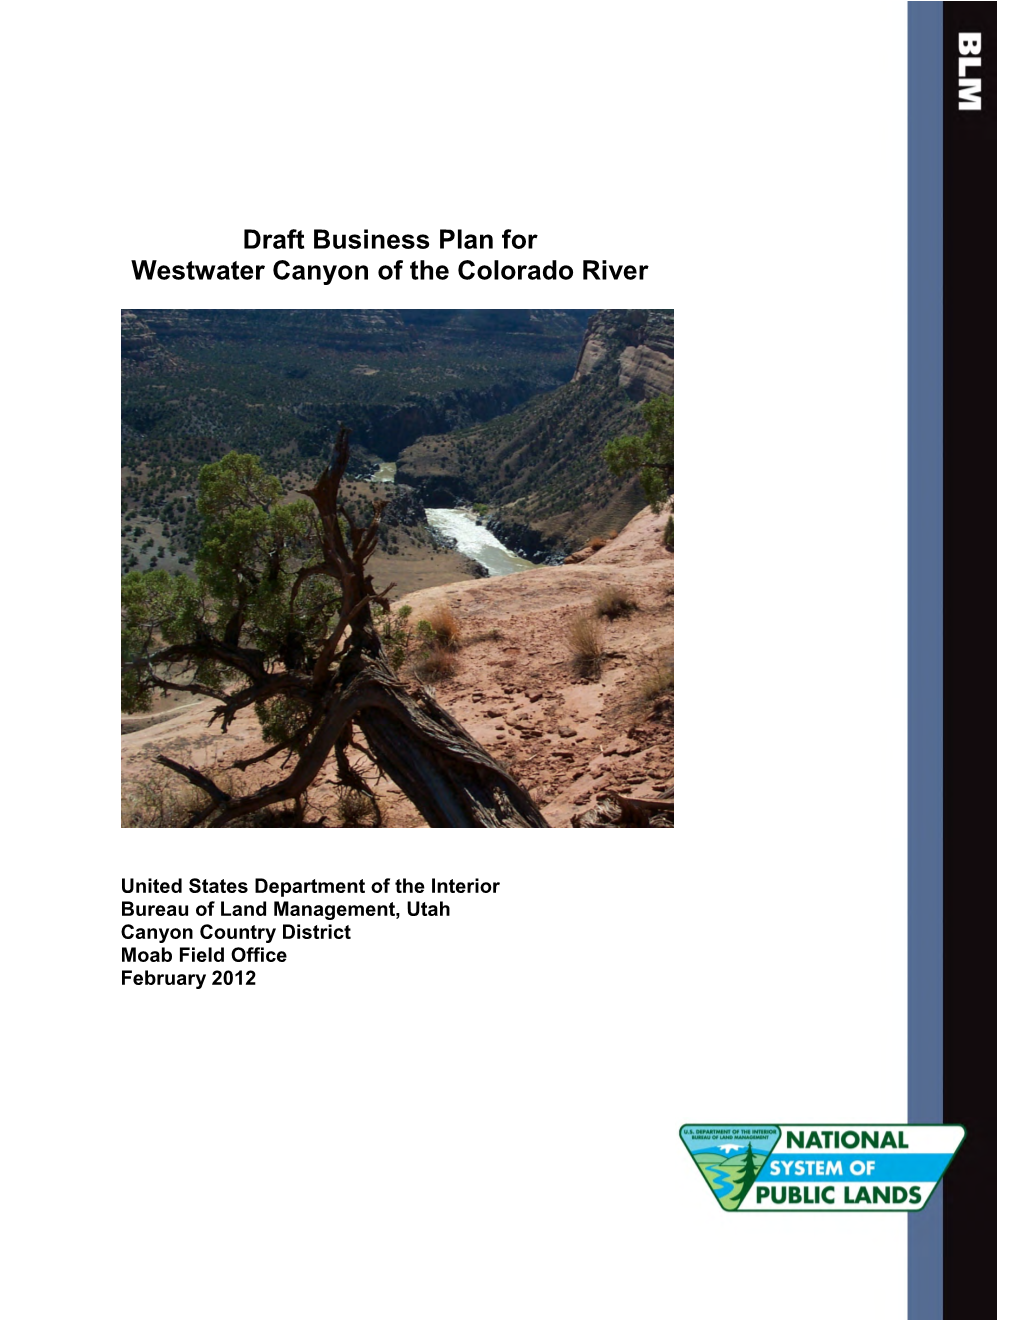 Draft Business Plan for Westwater Canyon of the Colorado River